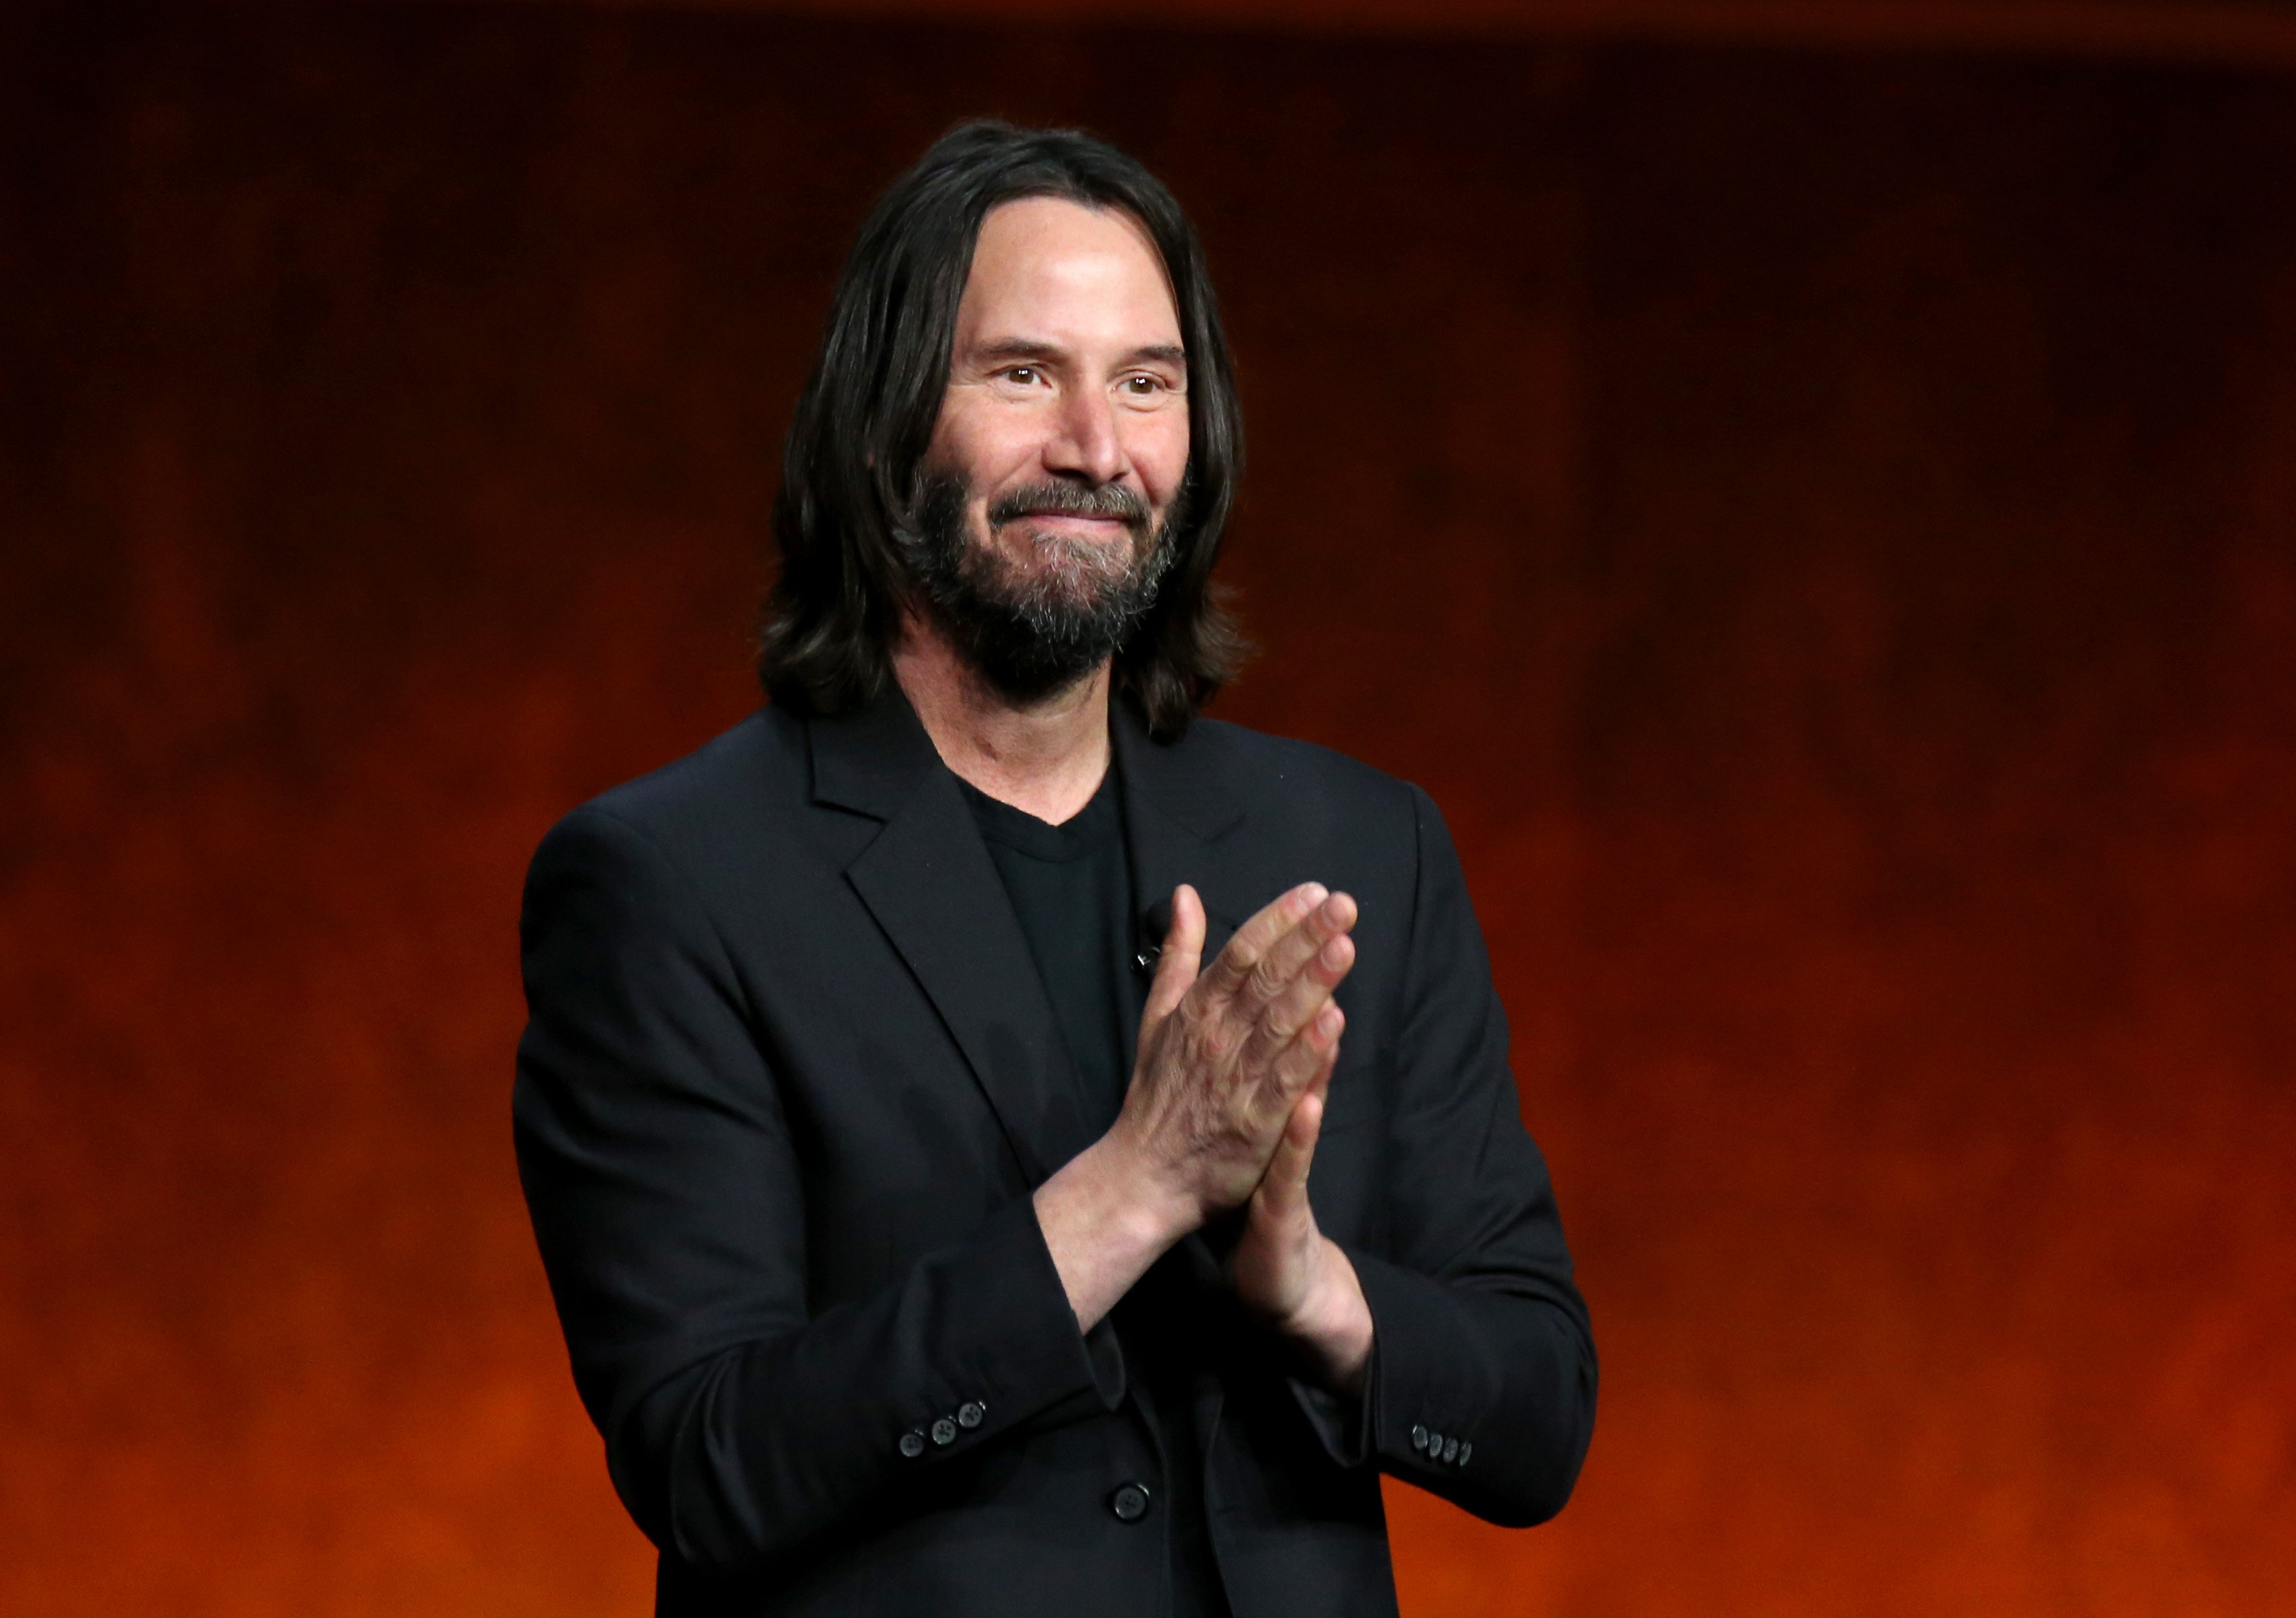 Actor Keanu Reeves speaking about his upcoming film "John Wick: Chapter 4" during Lionsgate exclusive presentation at Caesars Palace on April 28, 2022 in Las Vegas, Nevada. | Source: Getty Images